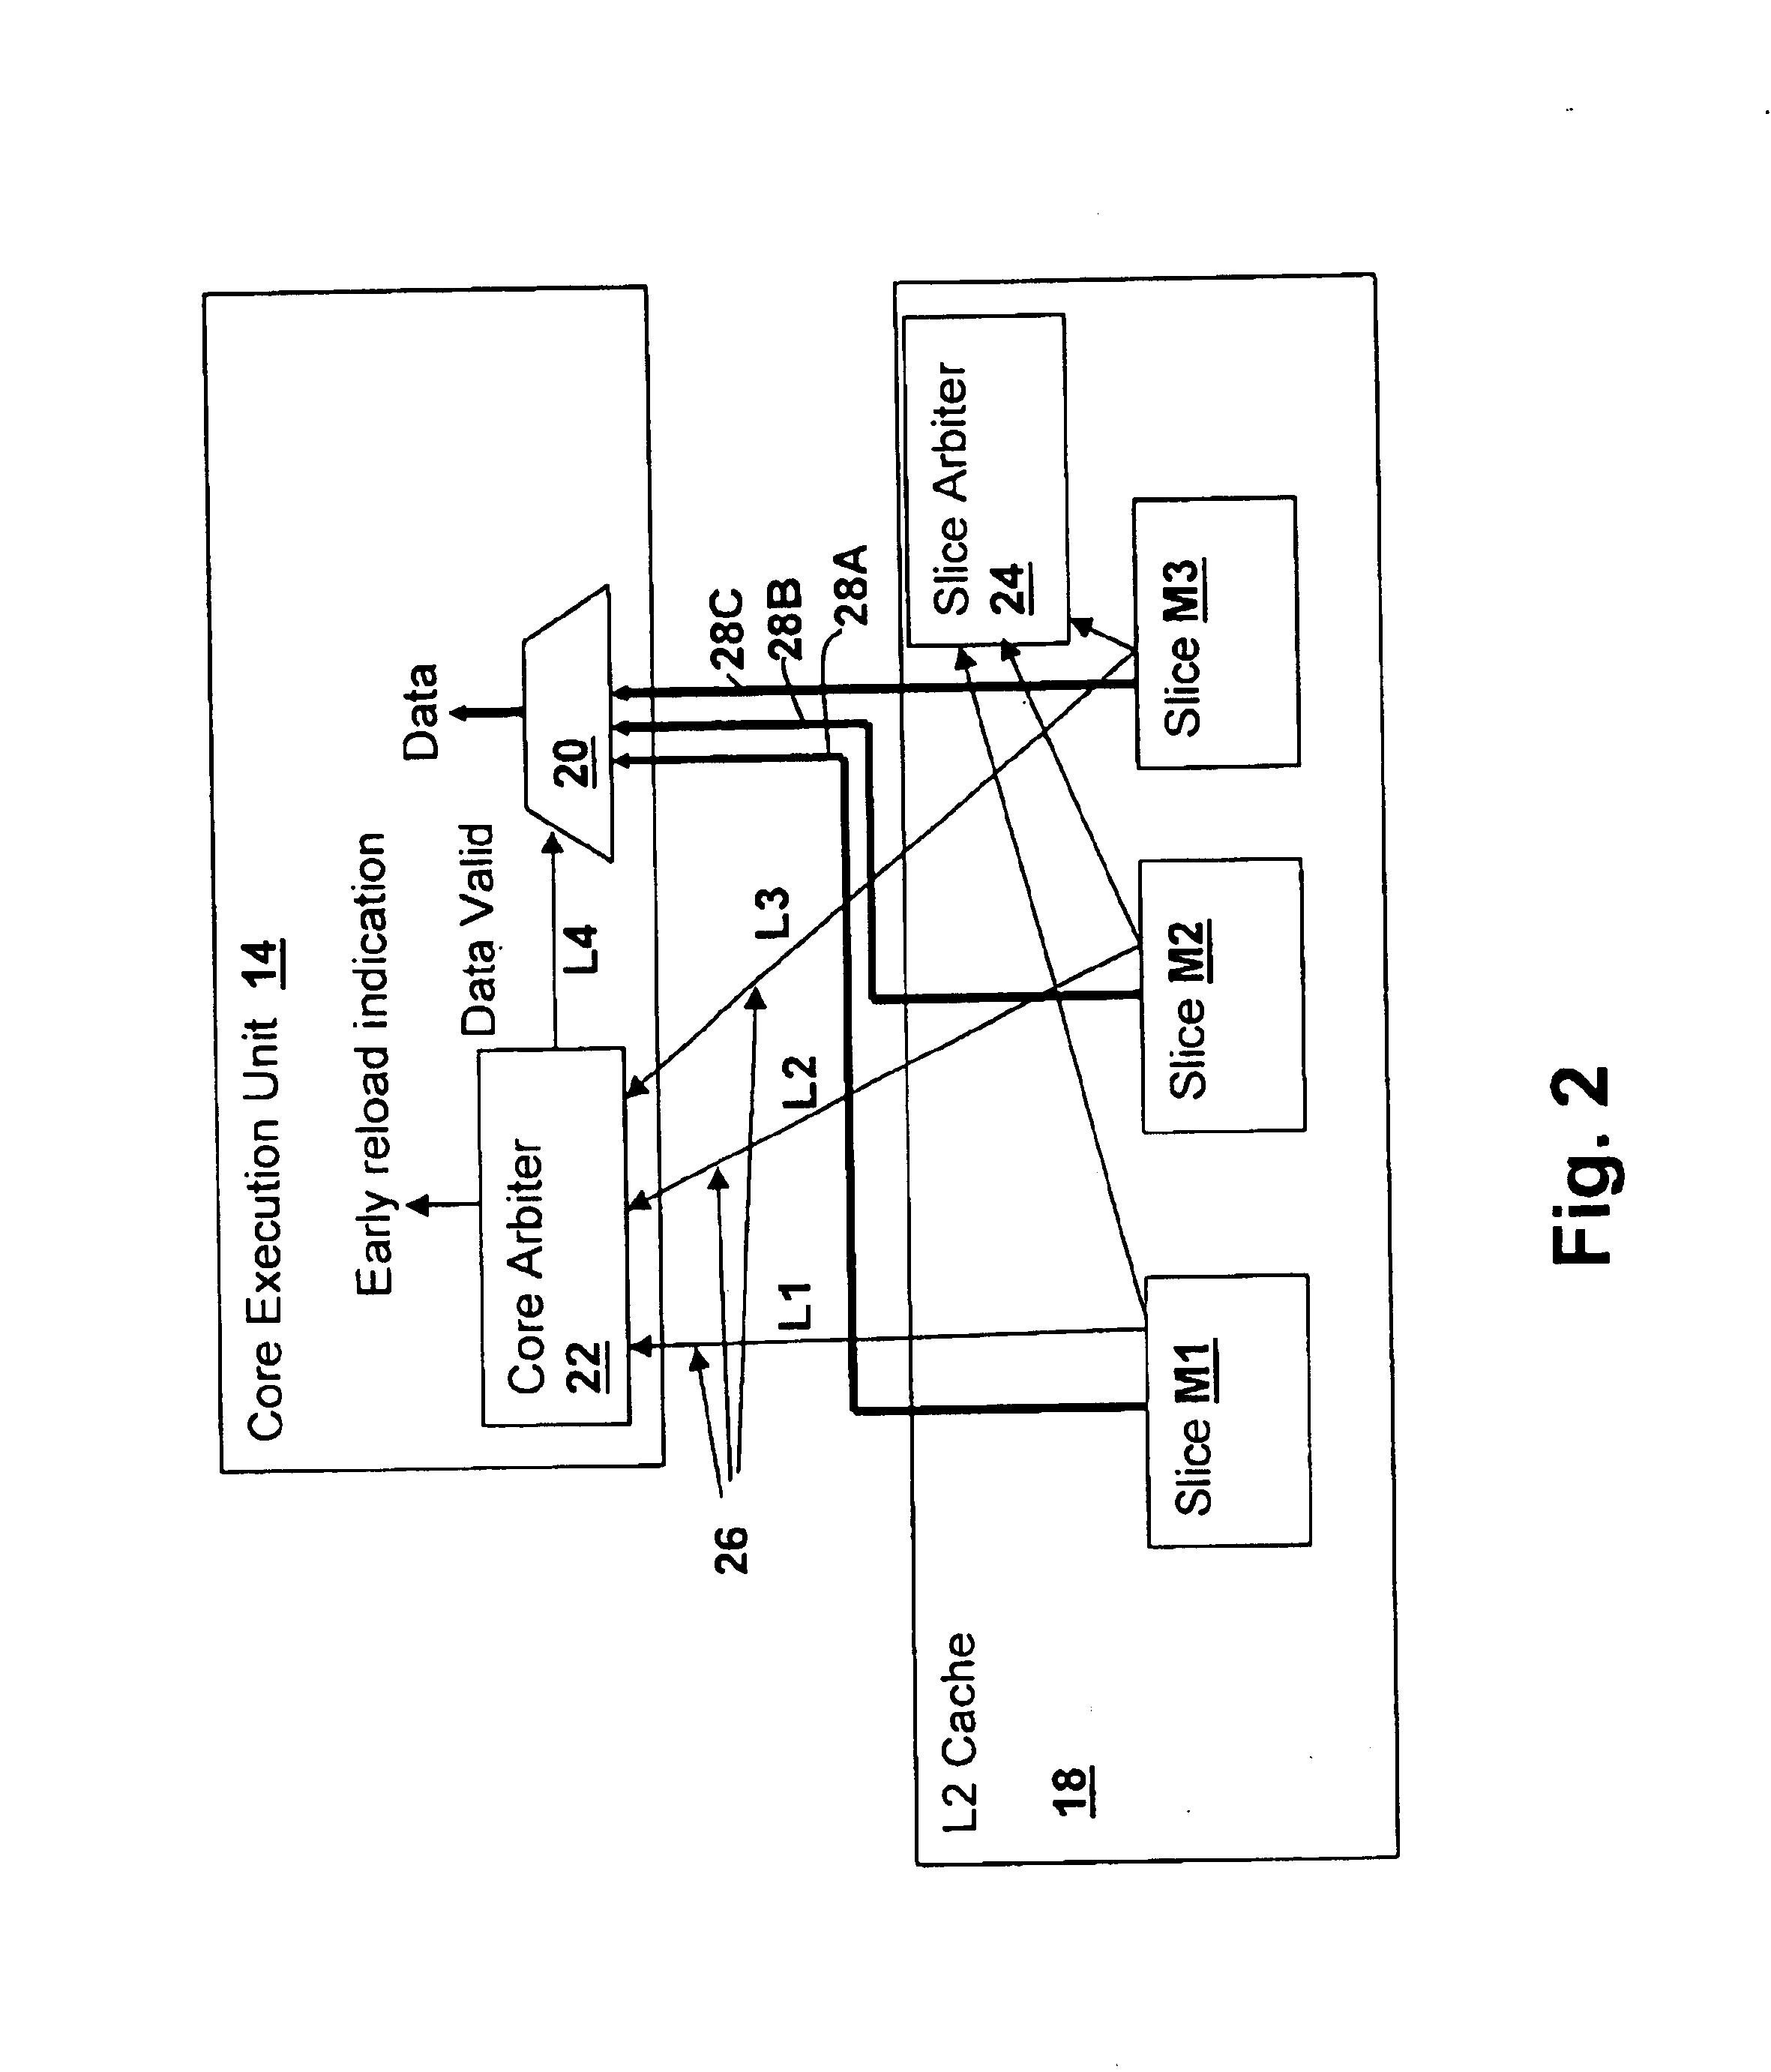 Method and system for managing distributed arbitration for multicycle data transfer requests